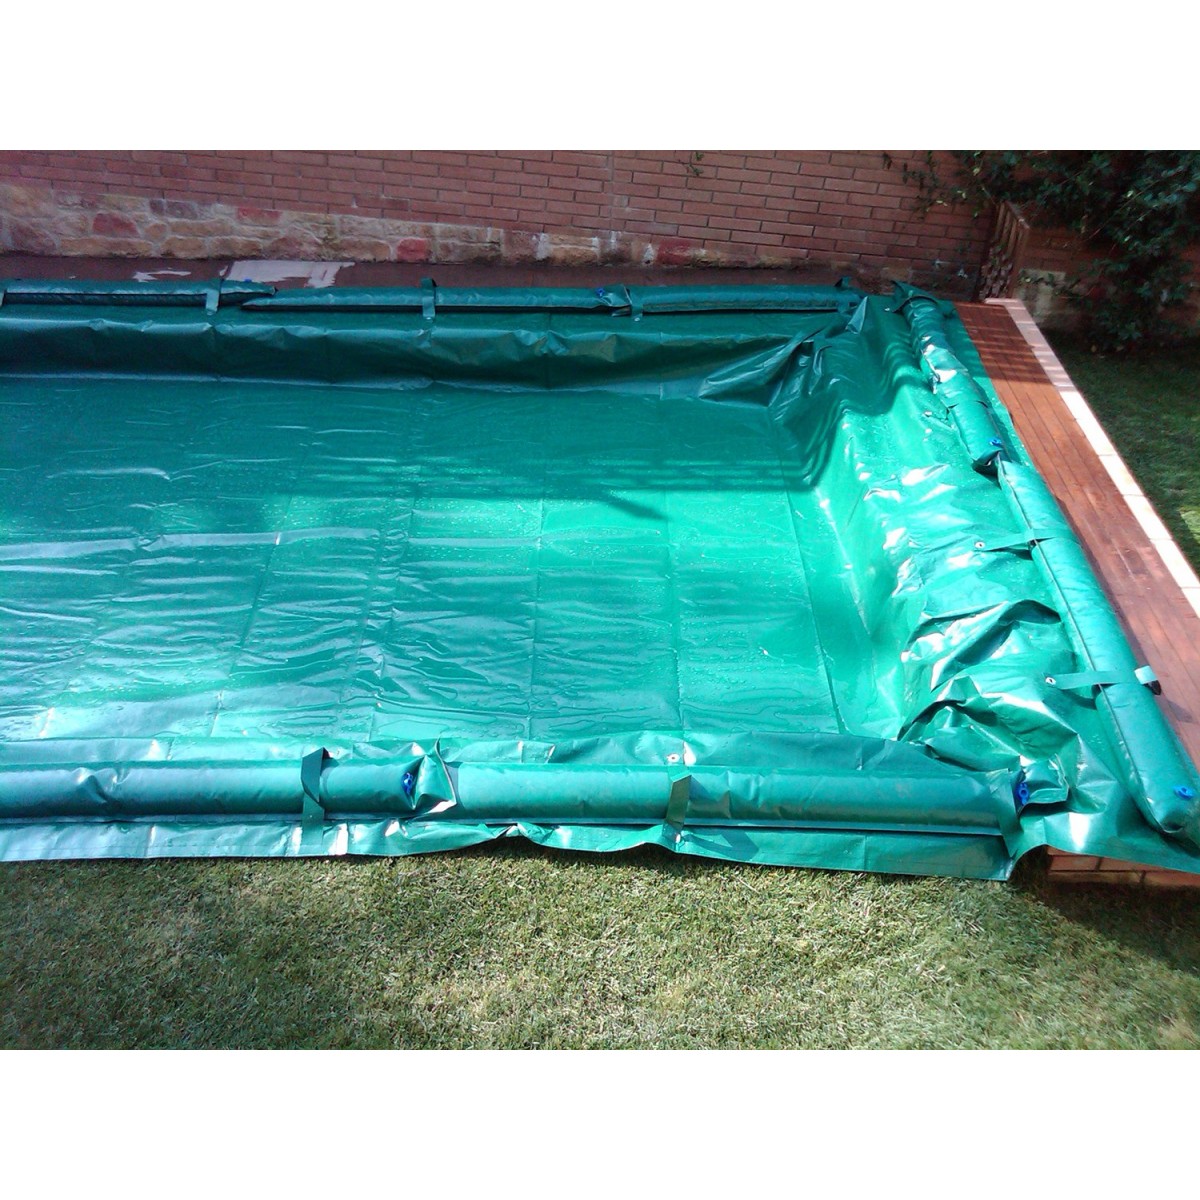 Winter cover with pool tanks - stretch of water 5x10